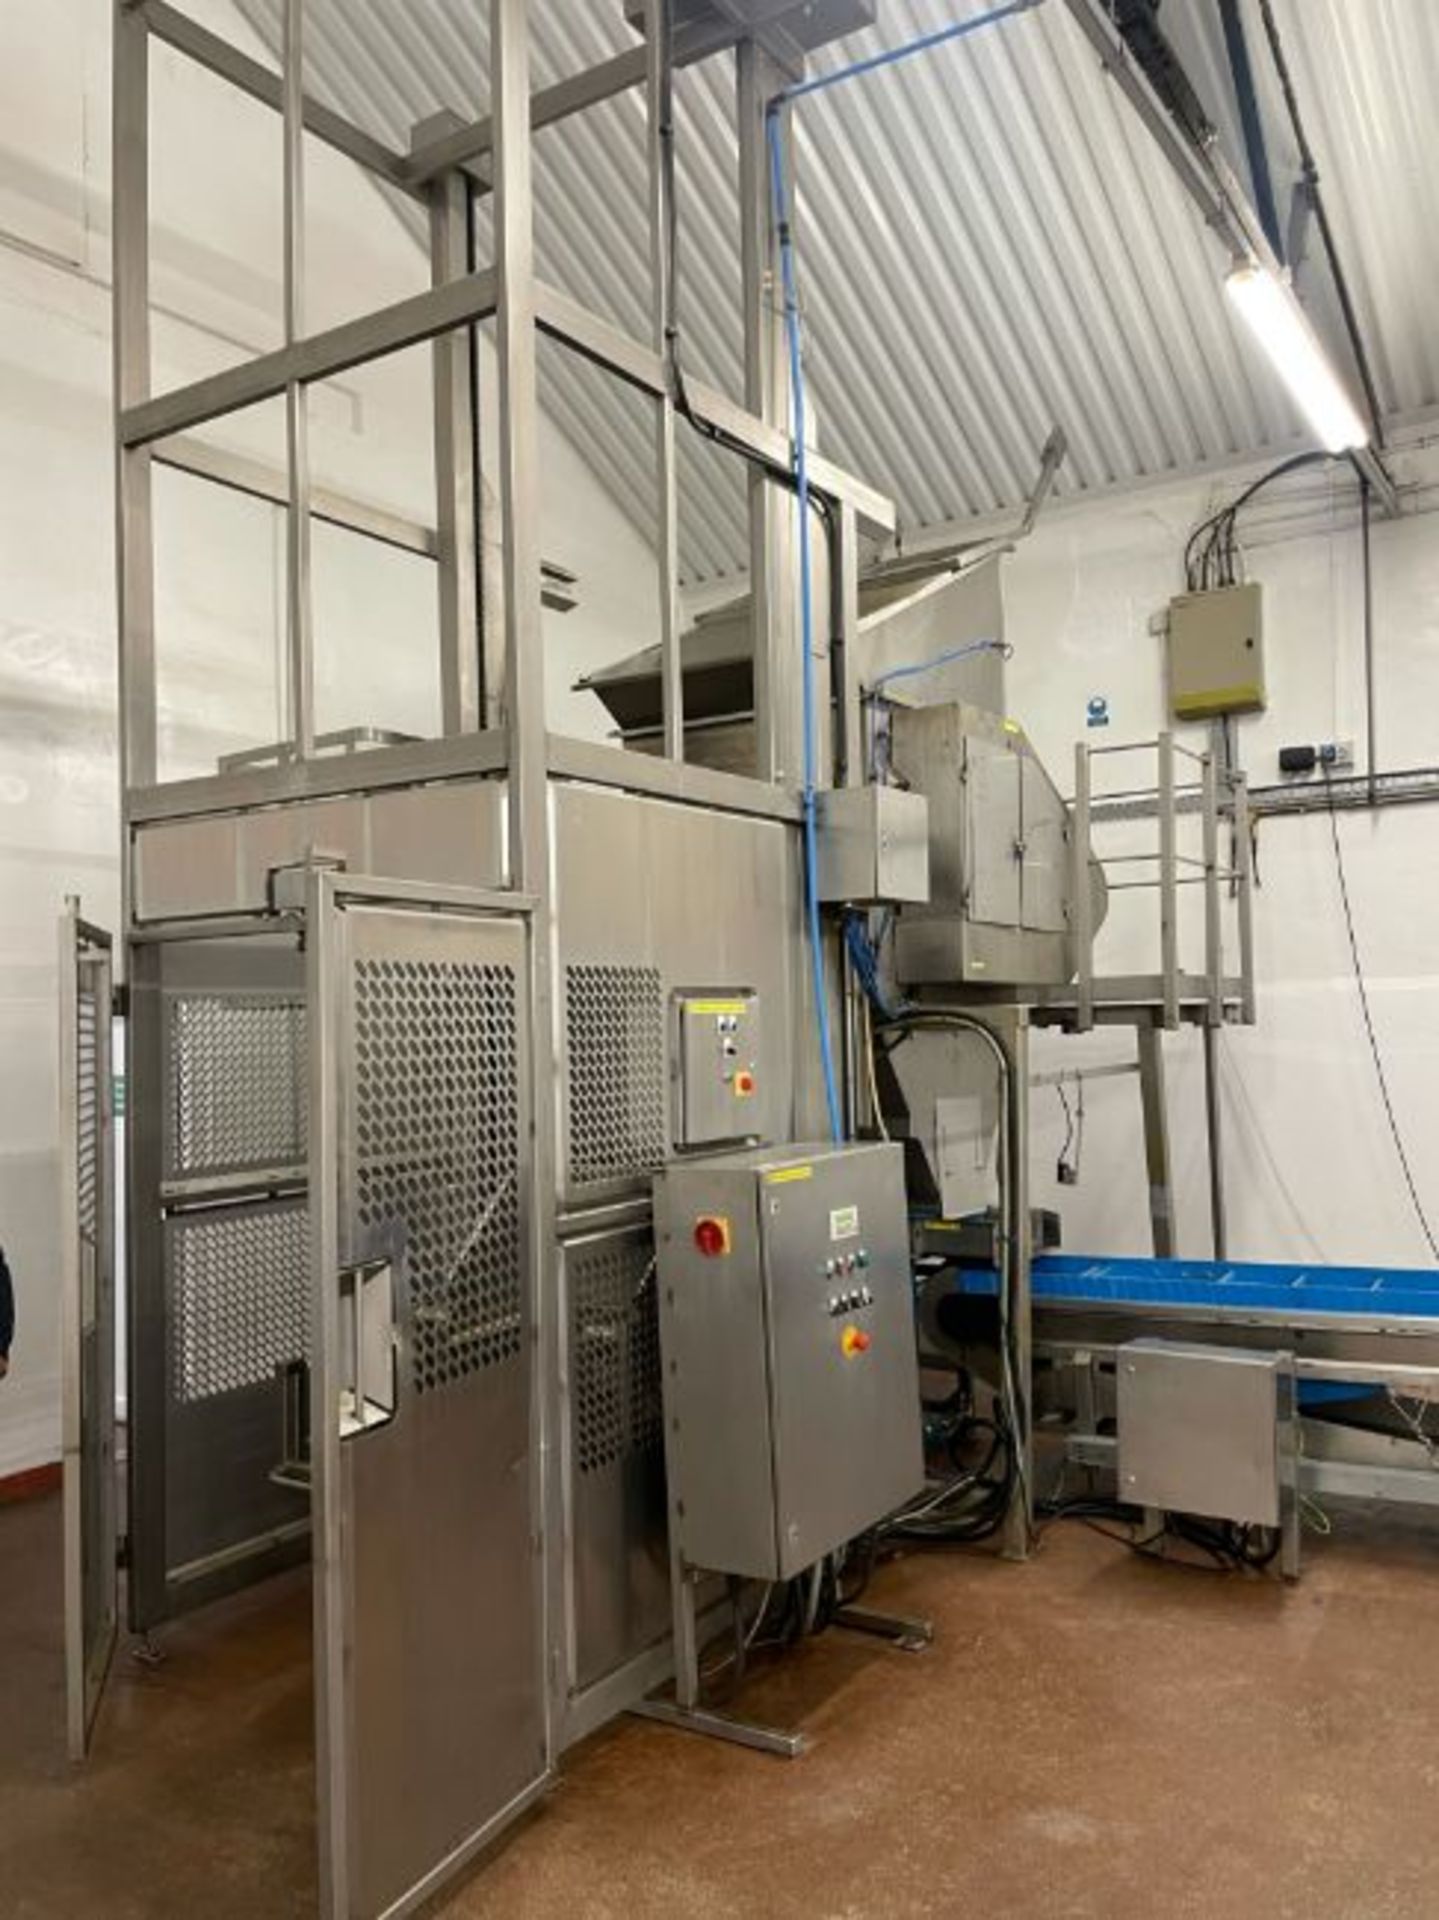 MUESLI/ CEREAL MIXING LINE, comprising Syspal Caged Buggy/ Tote Bin Lifter, feeding into Forberg